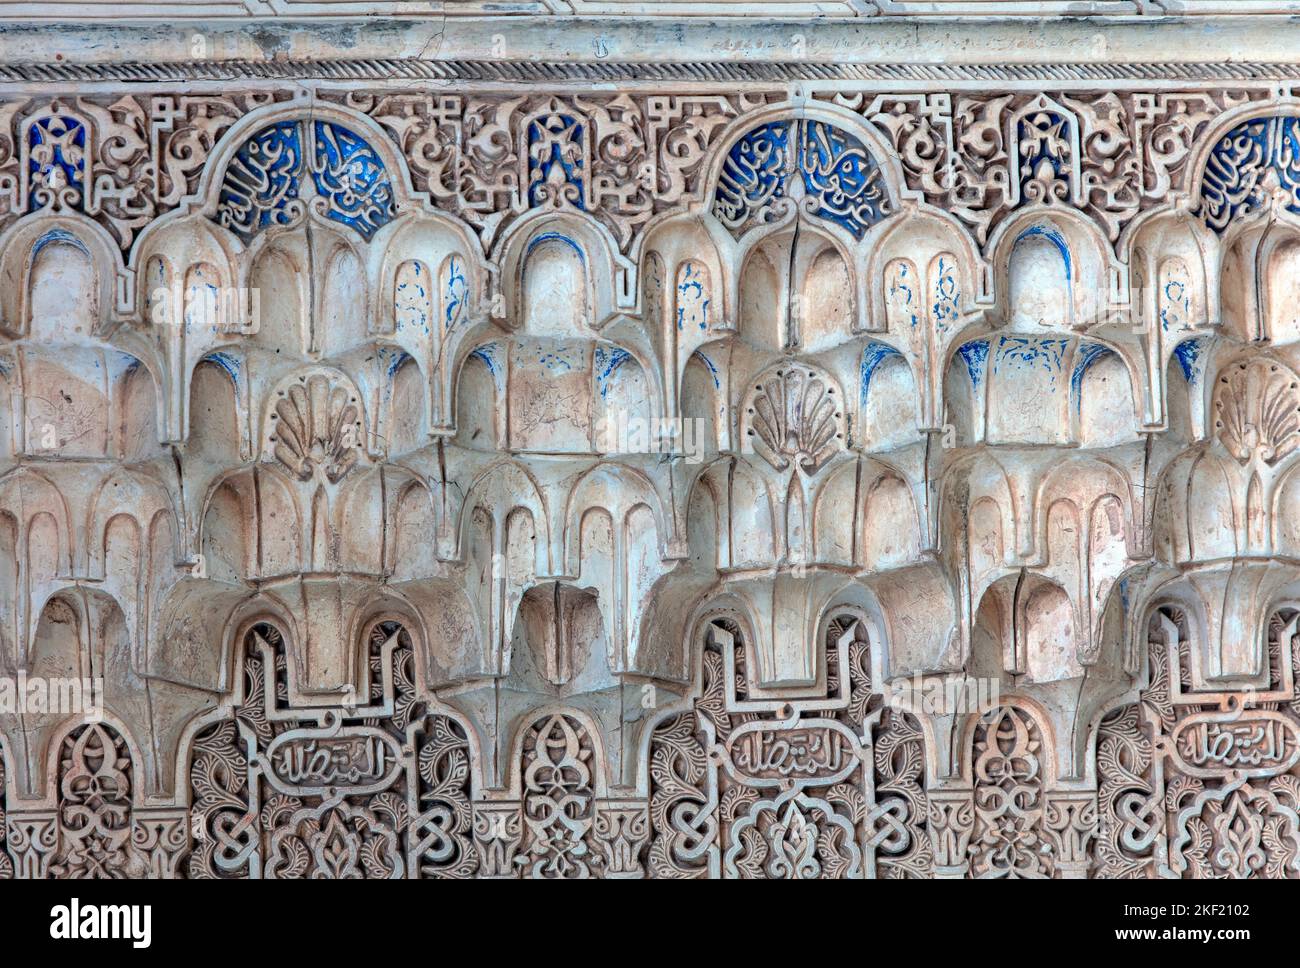 Islamic architectural details in the Alhambra, Granada, Andalusia, Spain Stock Photo